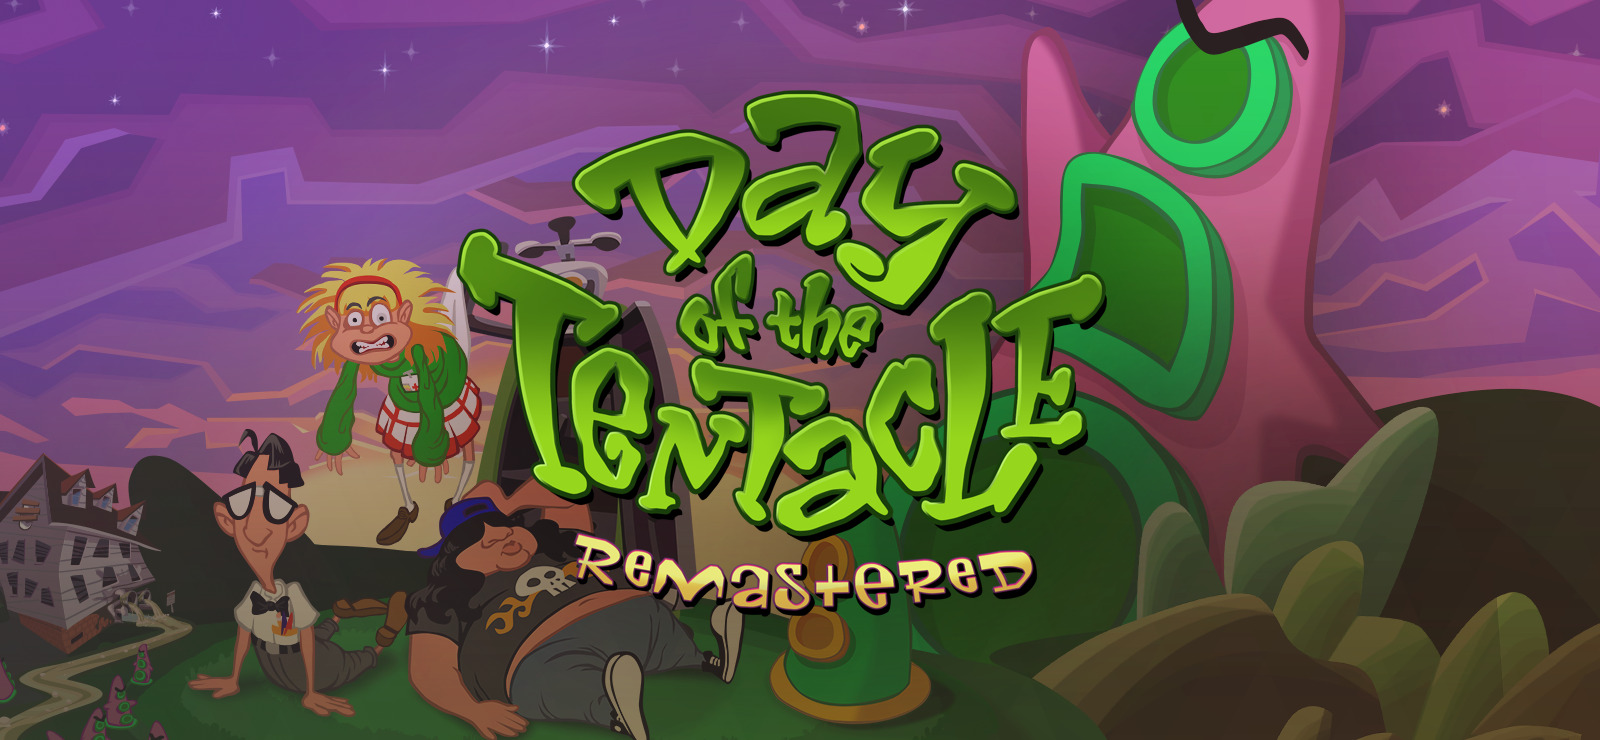 Day of tentacle remastered steam фото 91